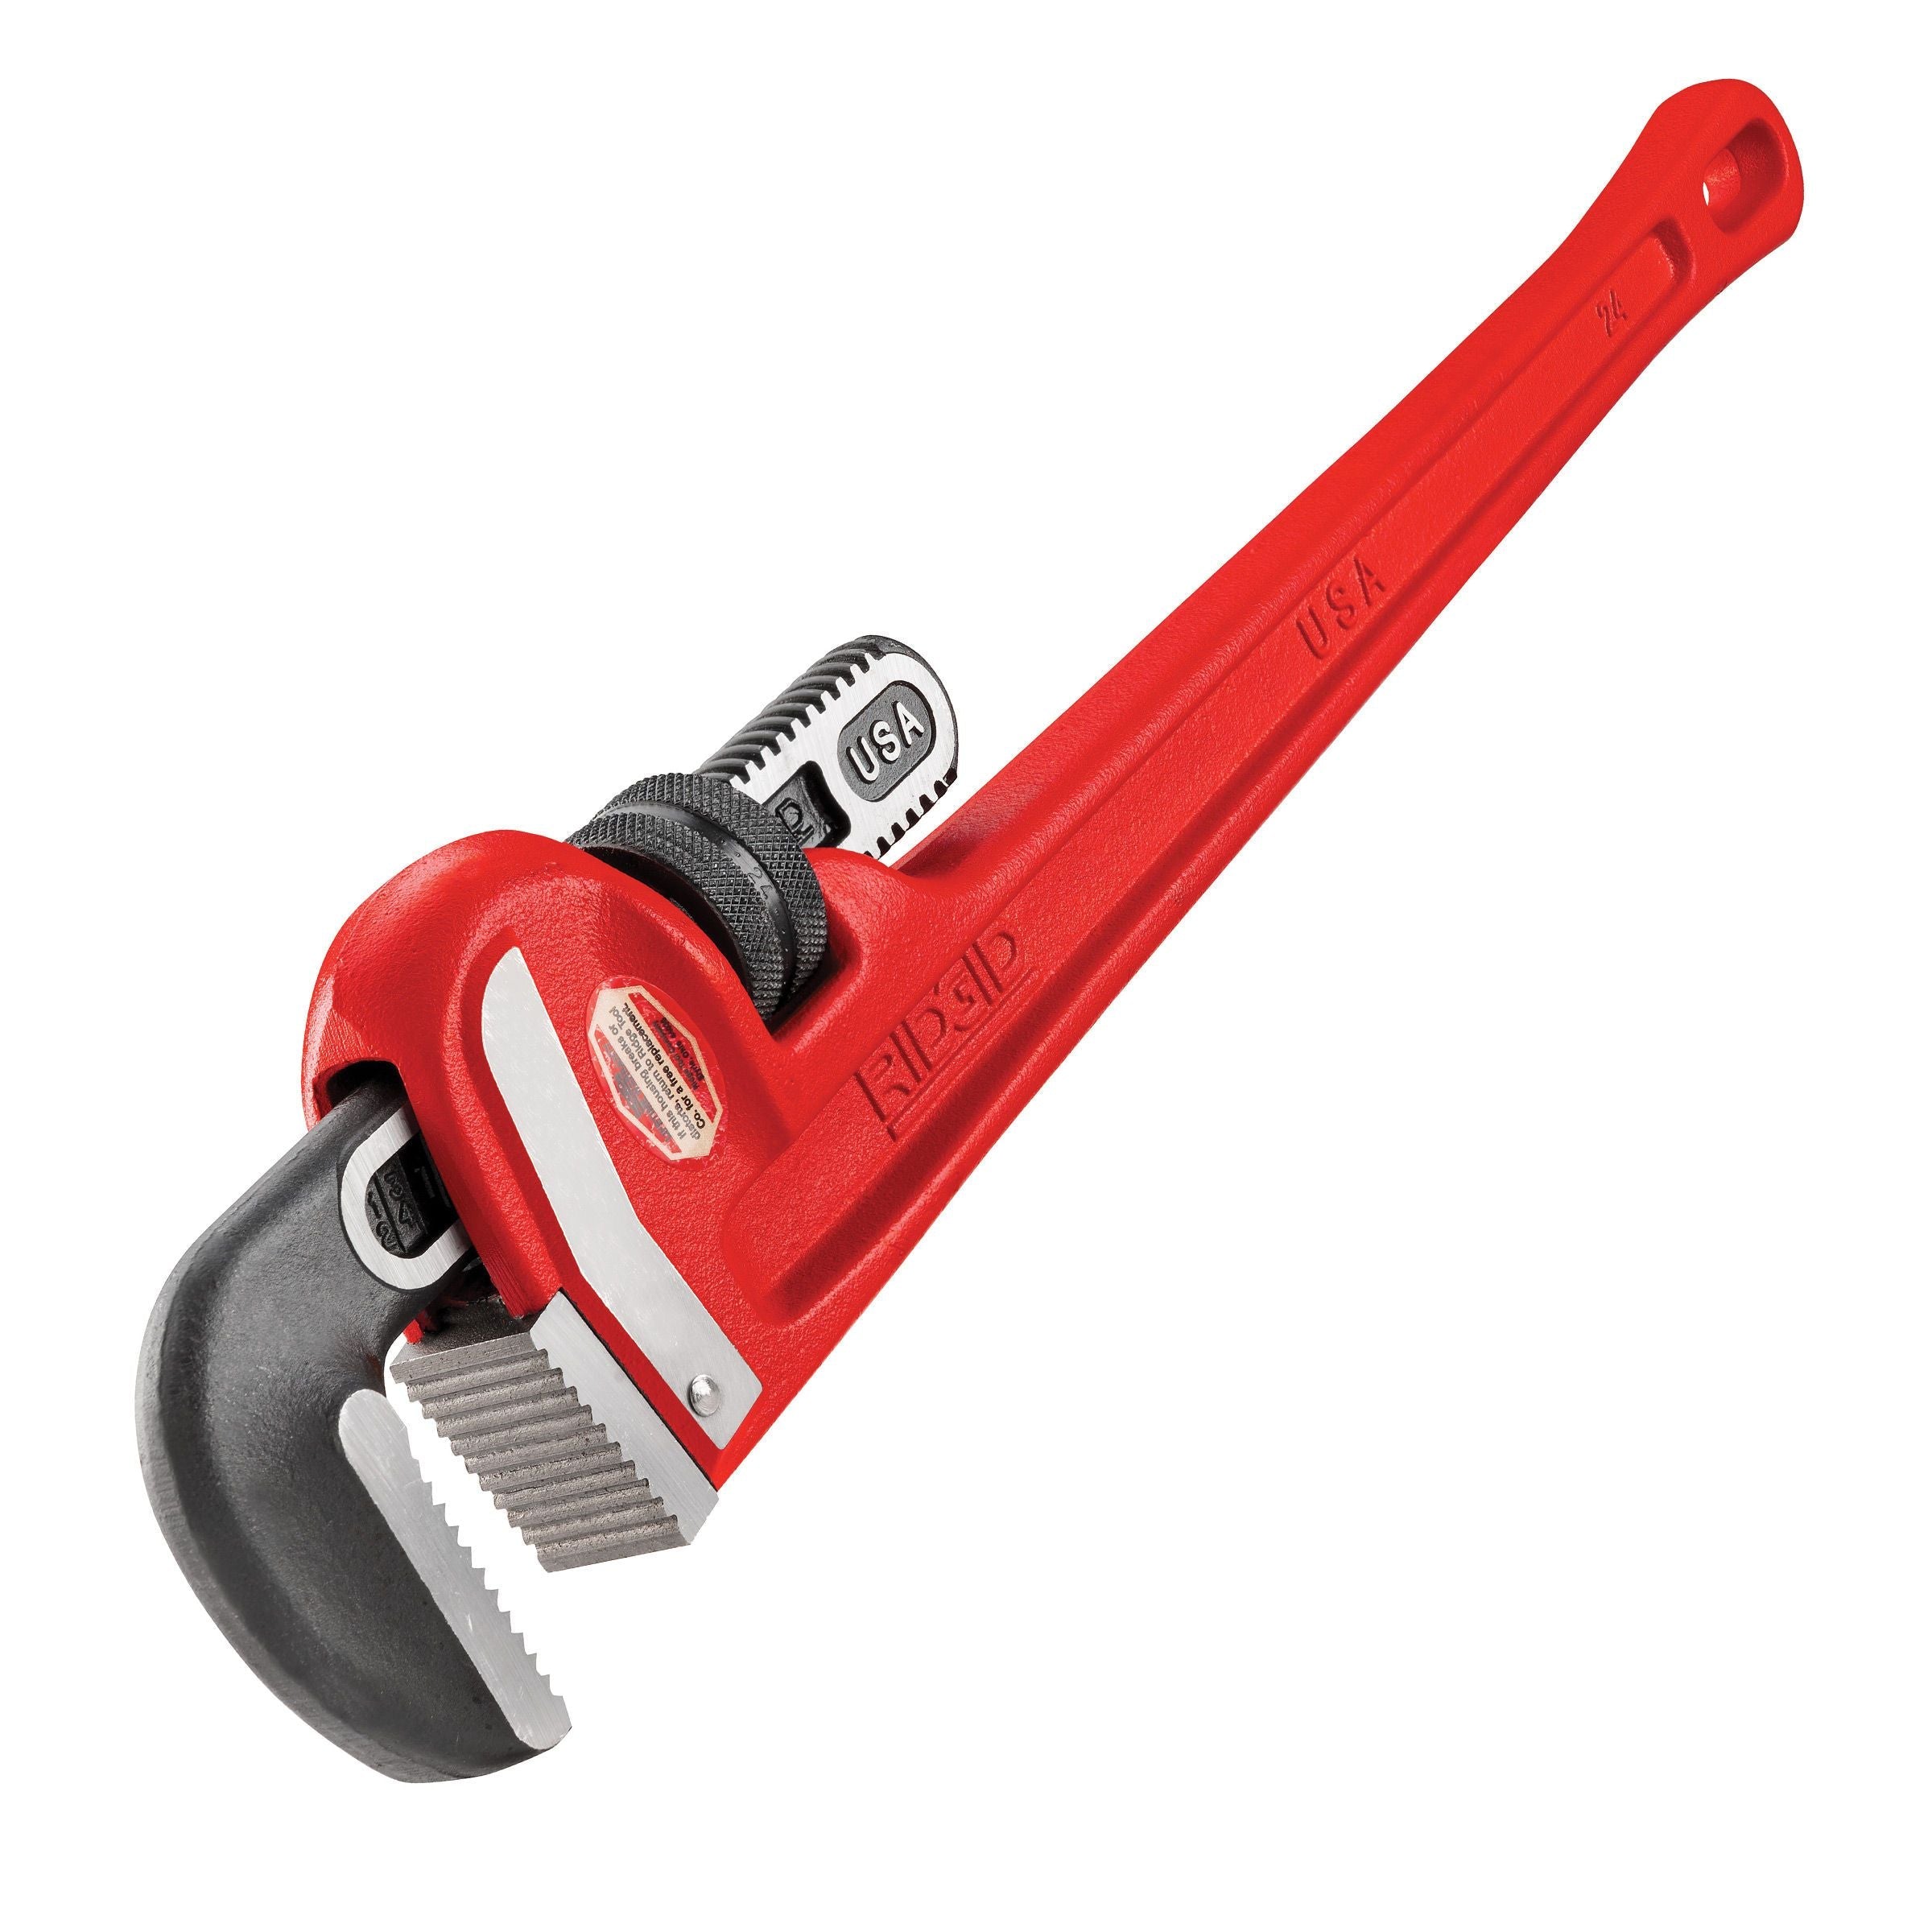 Ridgid Pipe Wrench 24 in - 31030